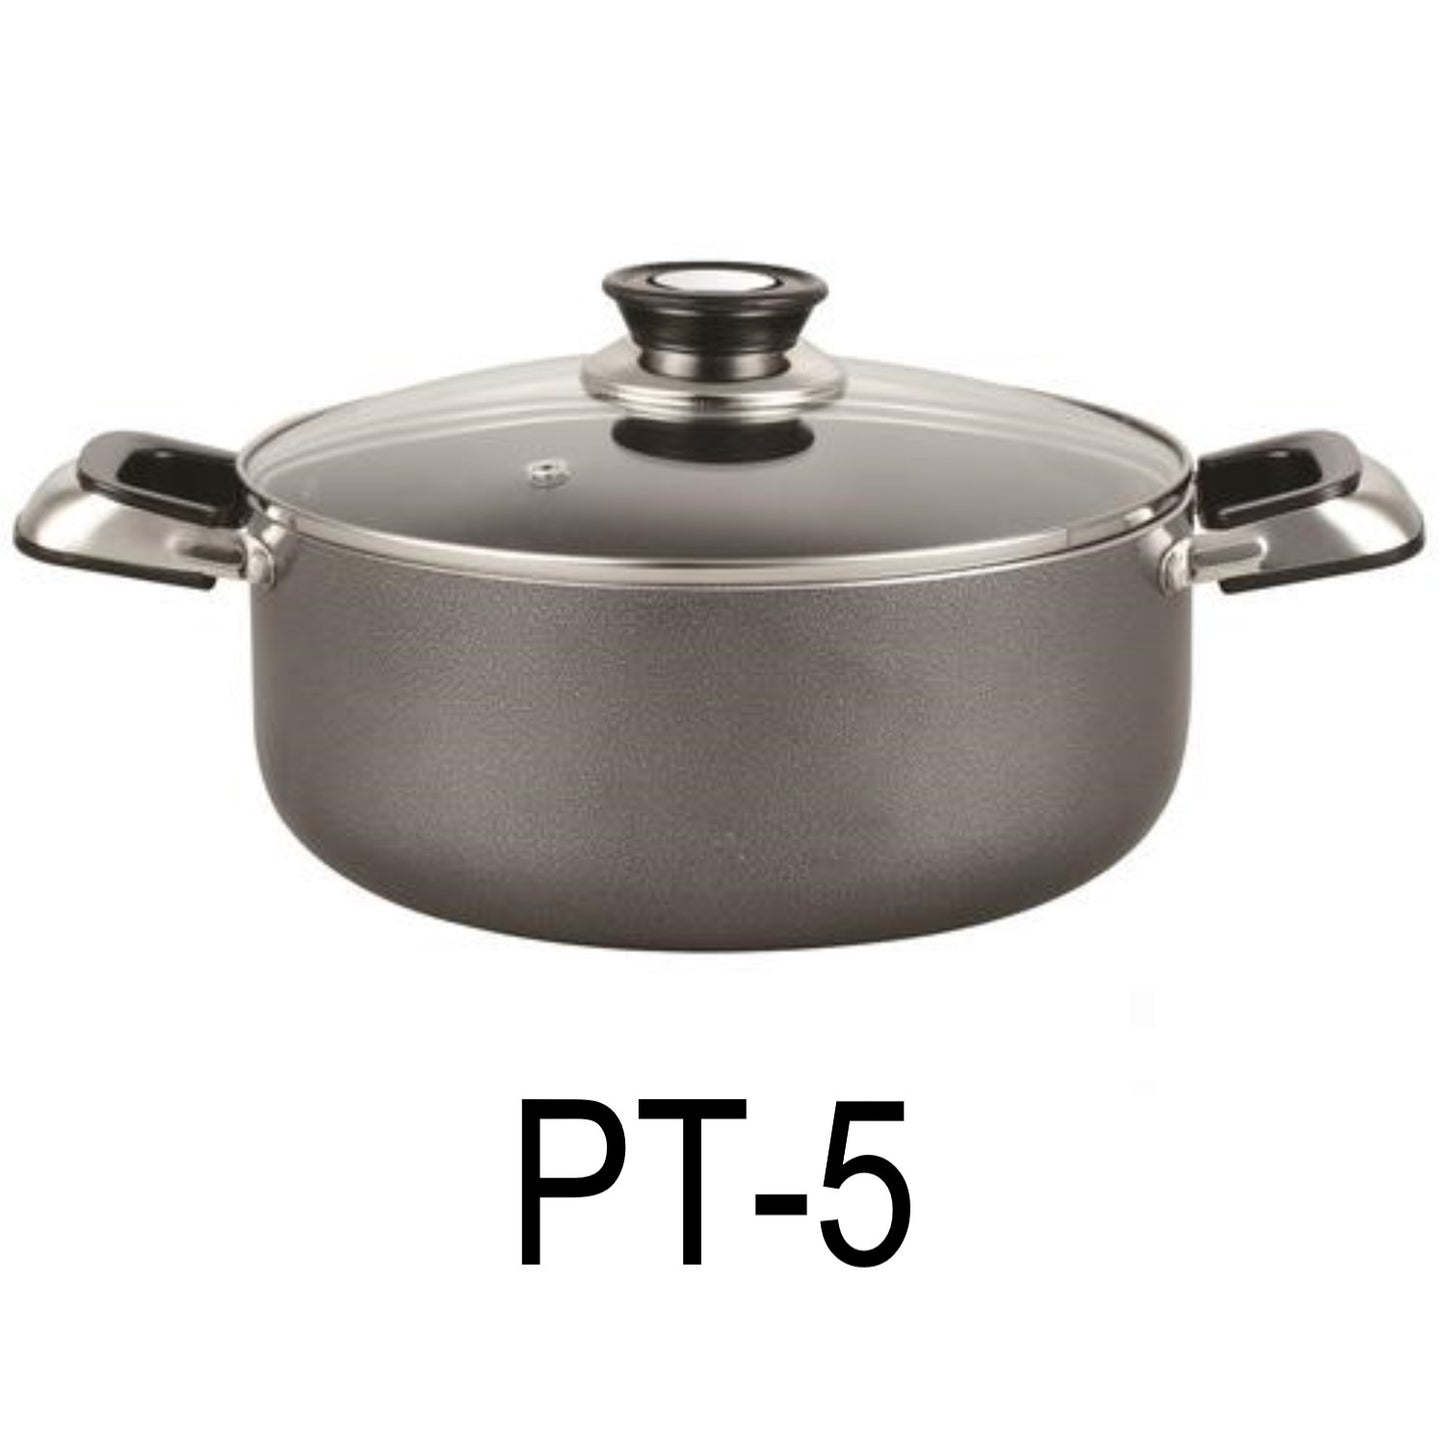 5 QT Non-stick Stockpot with Glass Lid